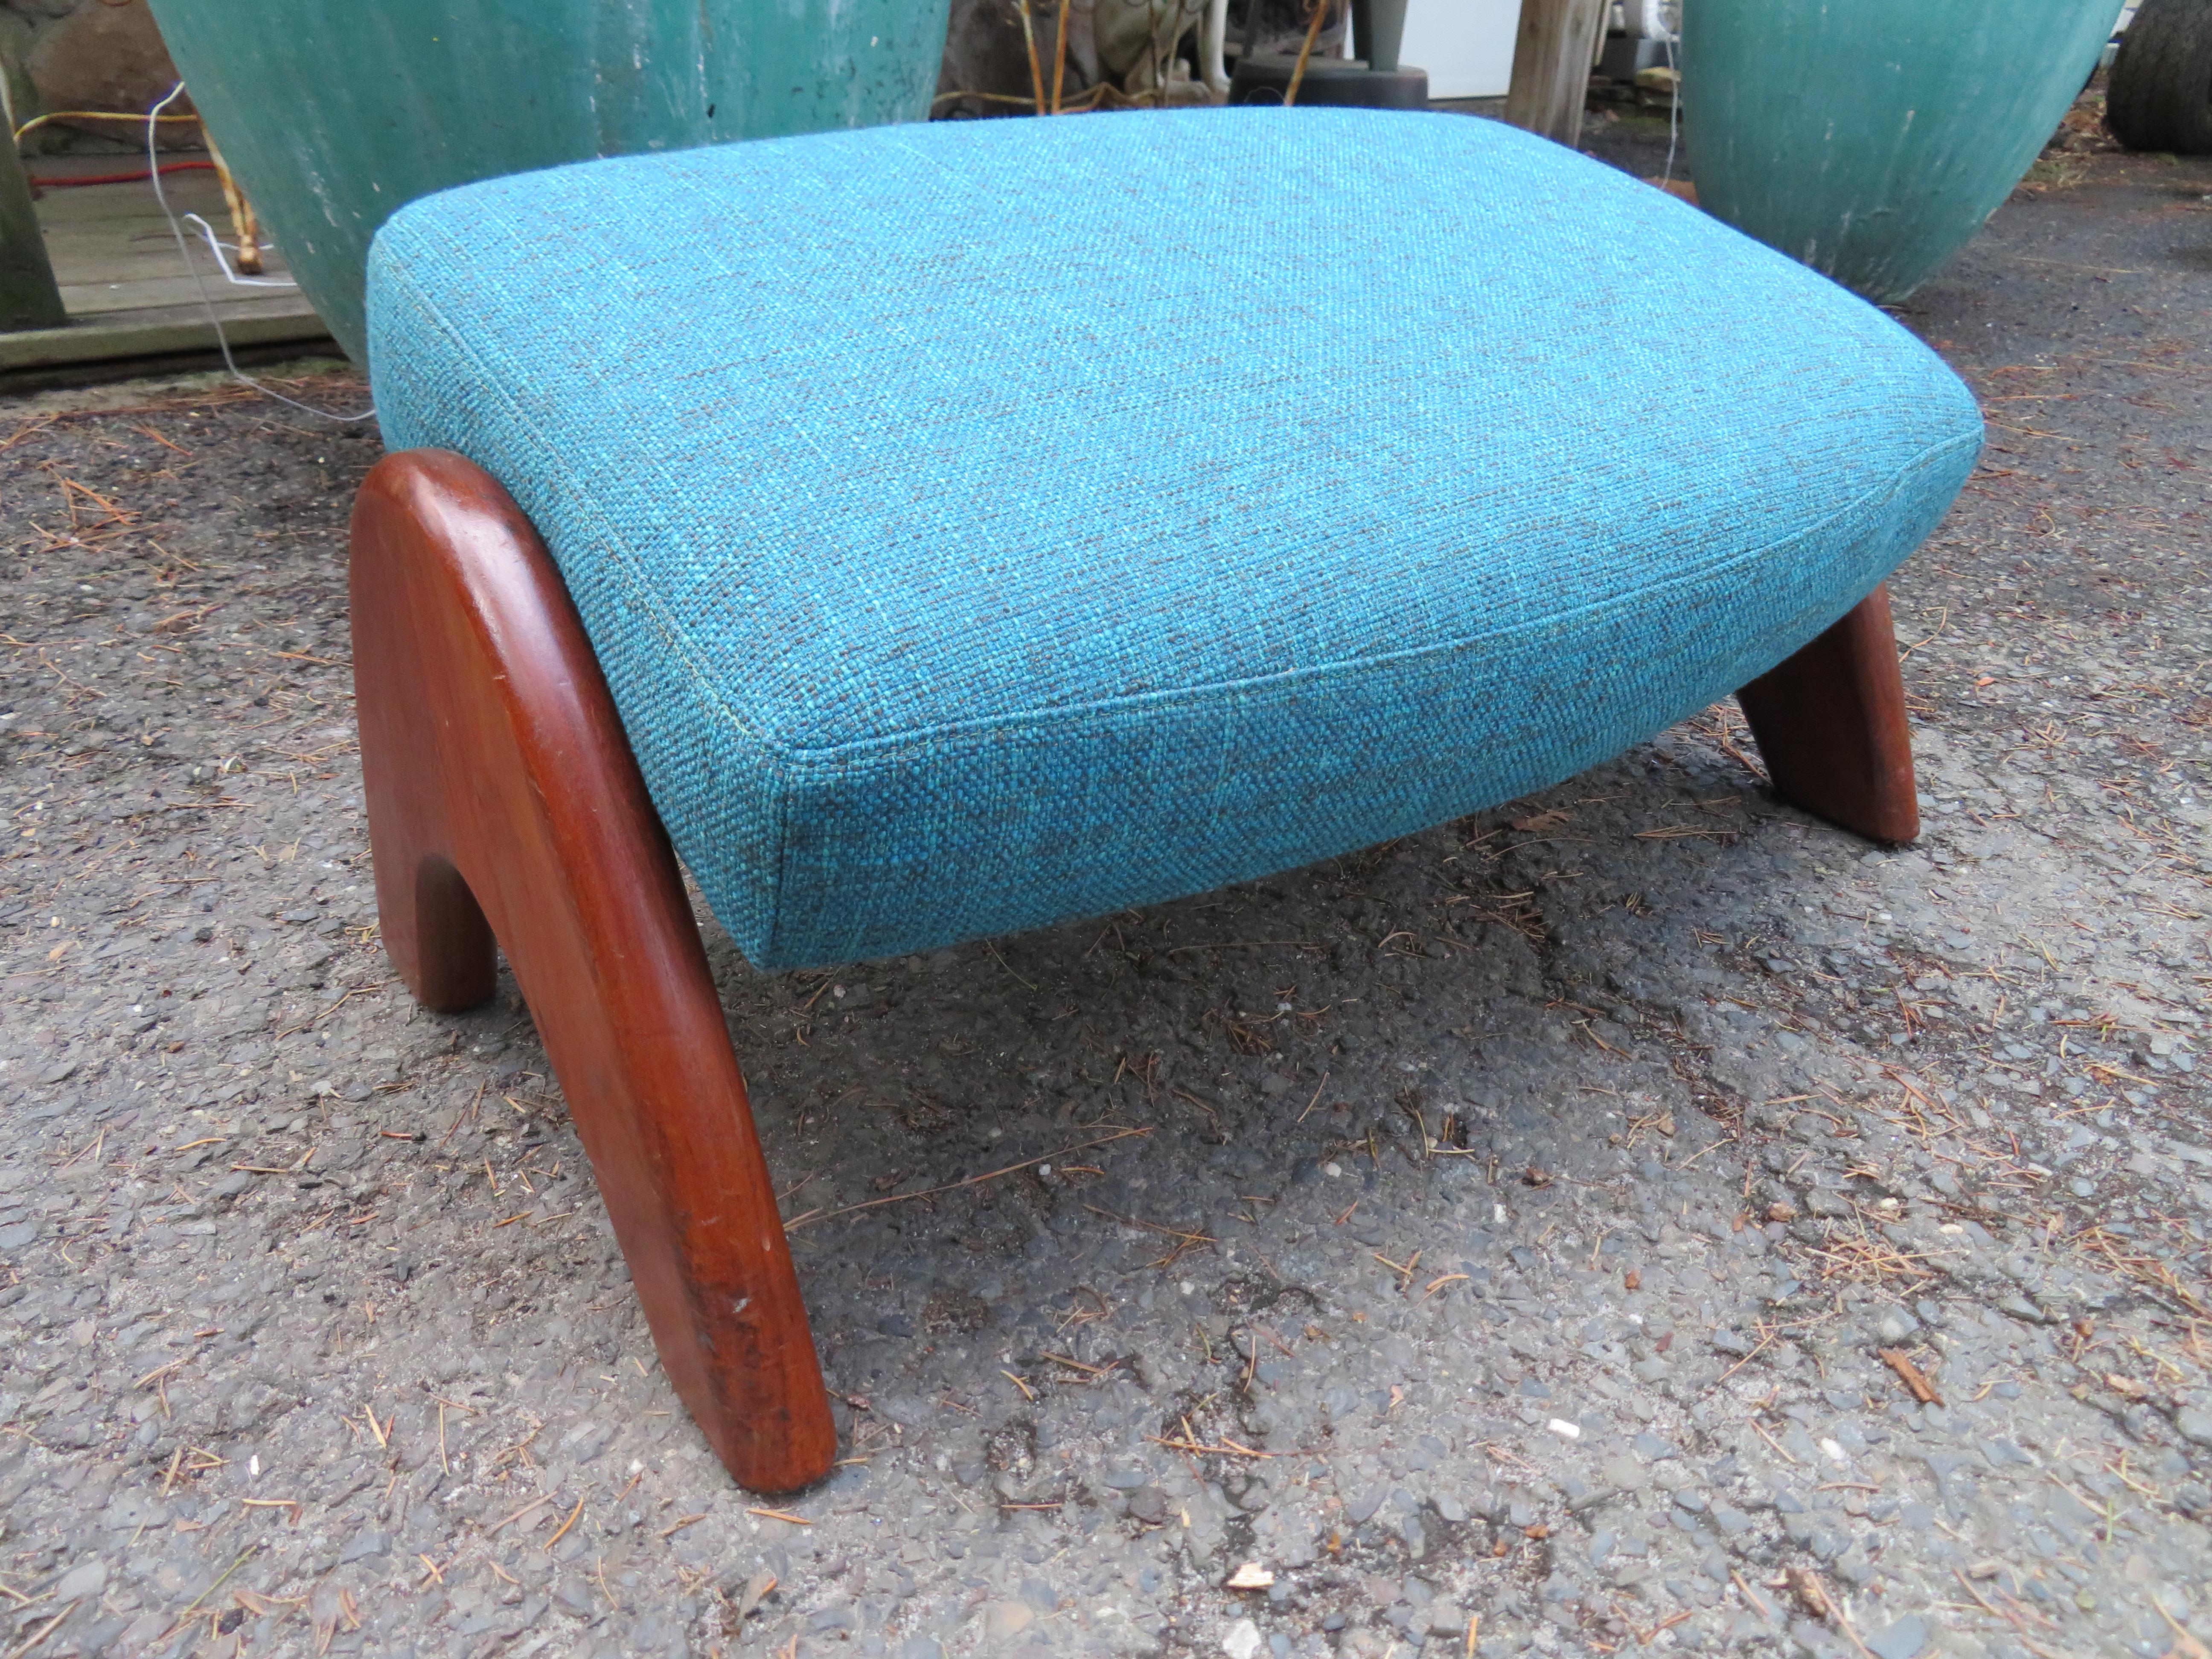 Mid-20th Century Excellent Adrian Pearsall “Grasshopper” Lounge Chair for Craft Associates